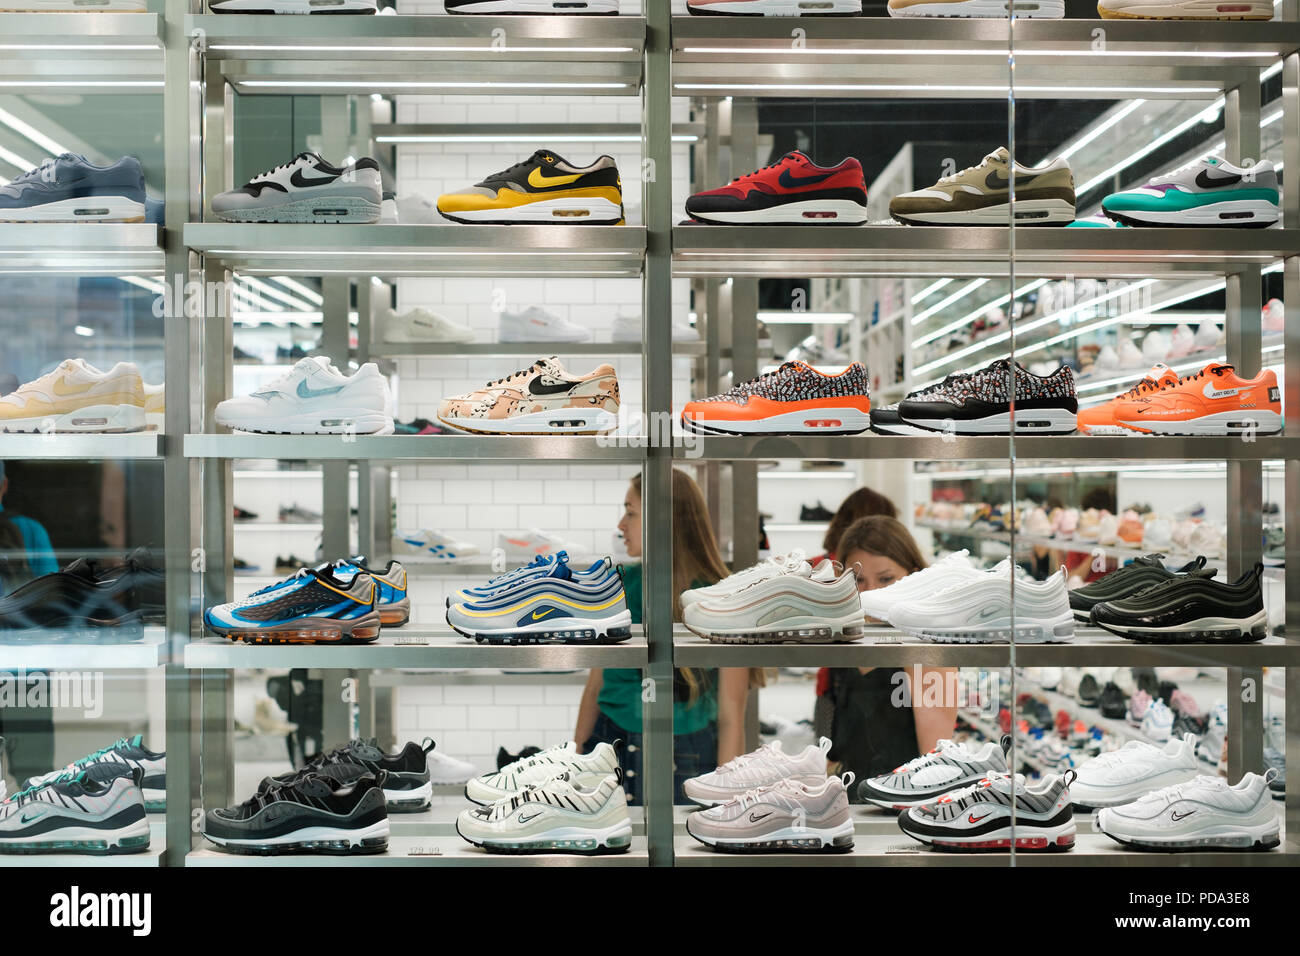 Berlin, Germany - july 2018: Nike sneaker collection / sport shoes in shopping window at store in Berlin Stock Photo Alamy